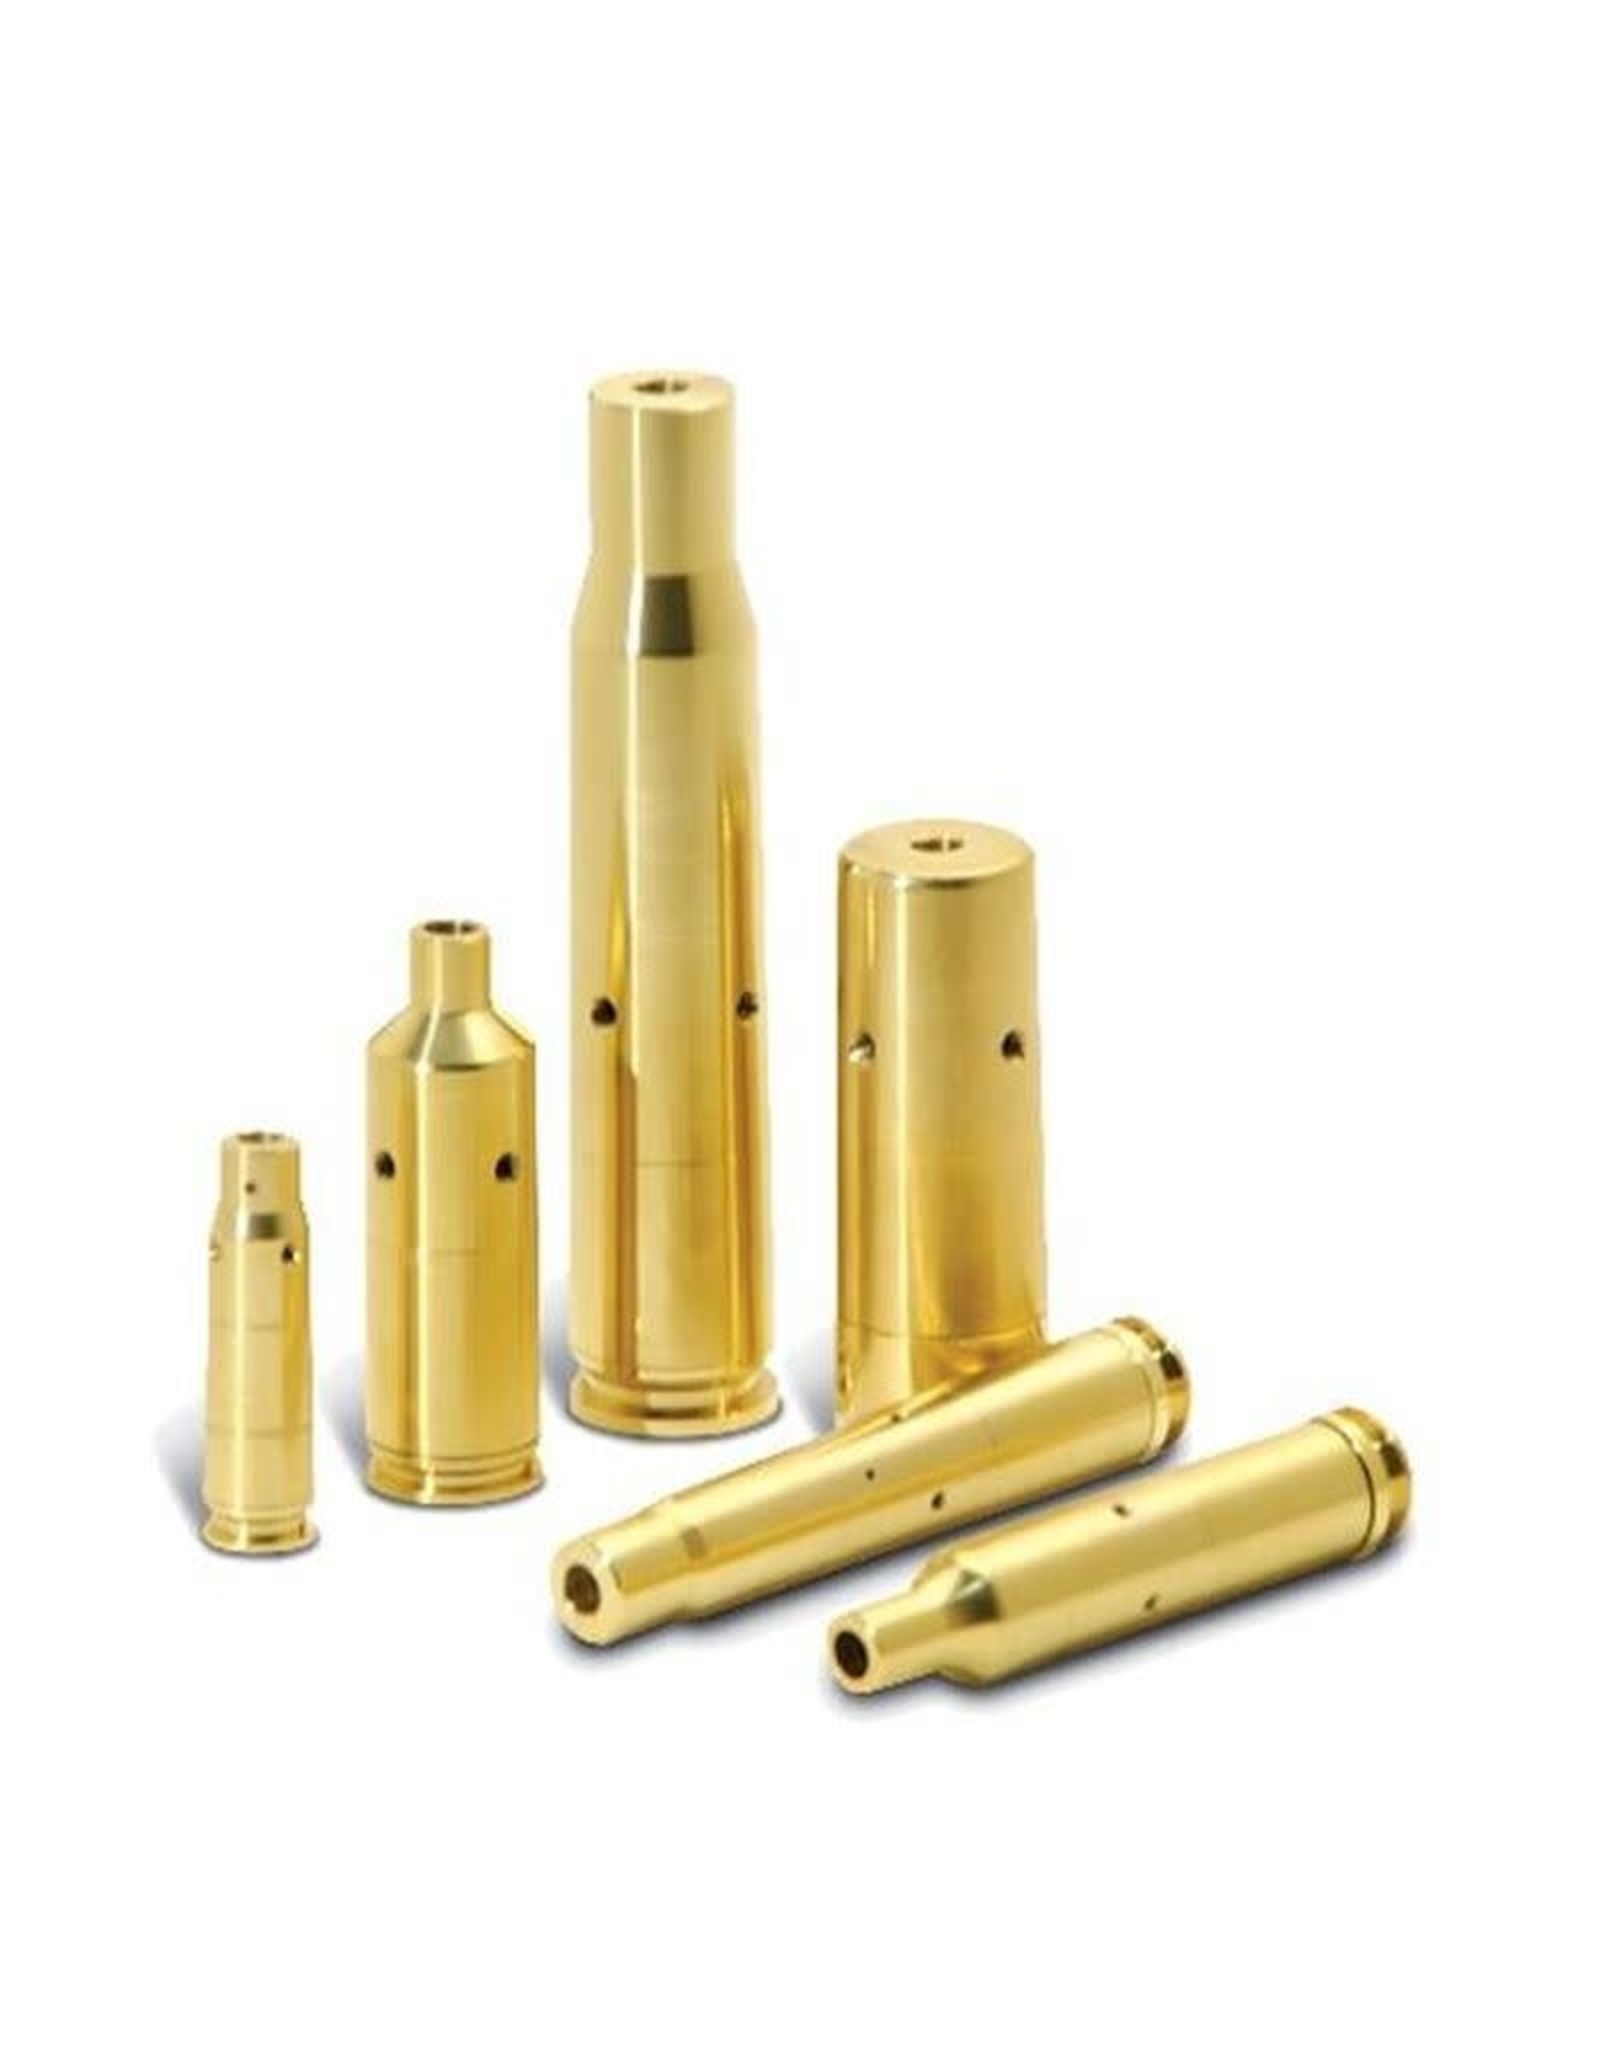 Shooting Made Easy Bullet Laser Bore Sighting System 9mm